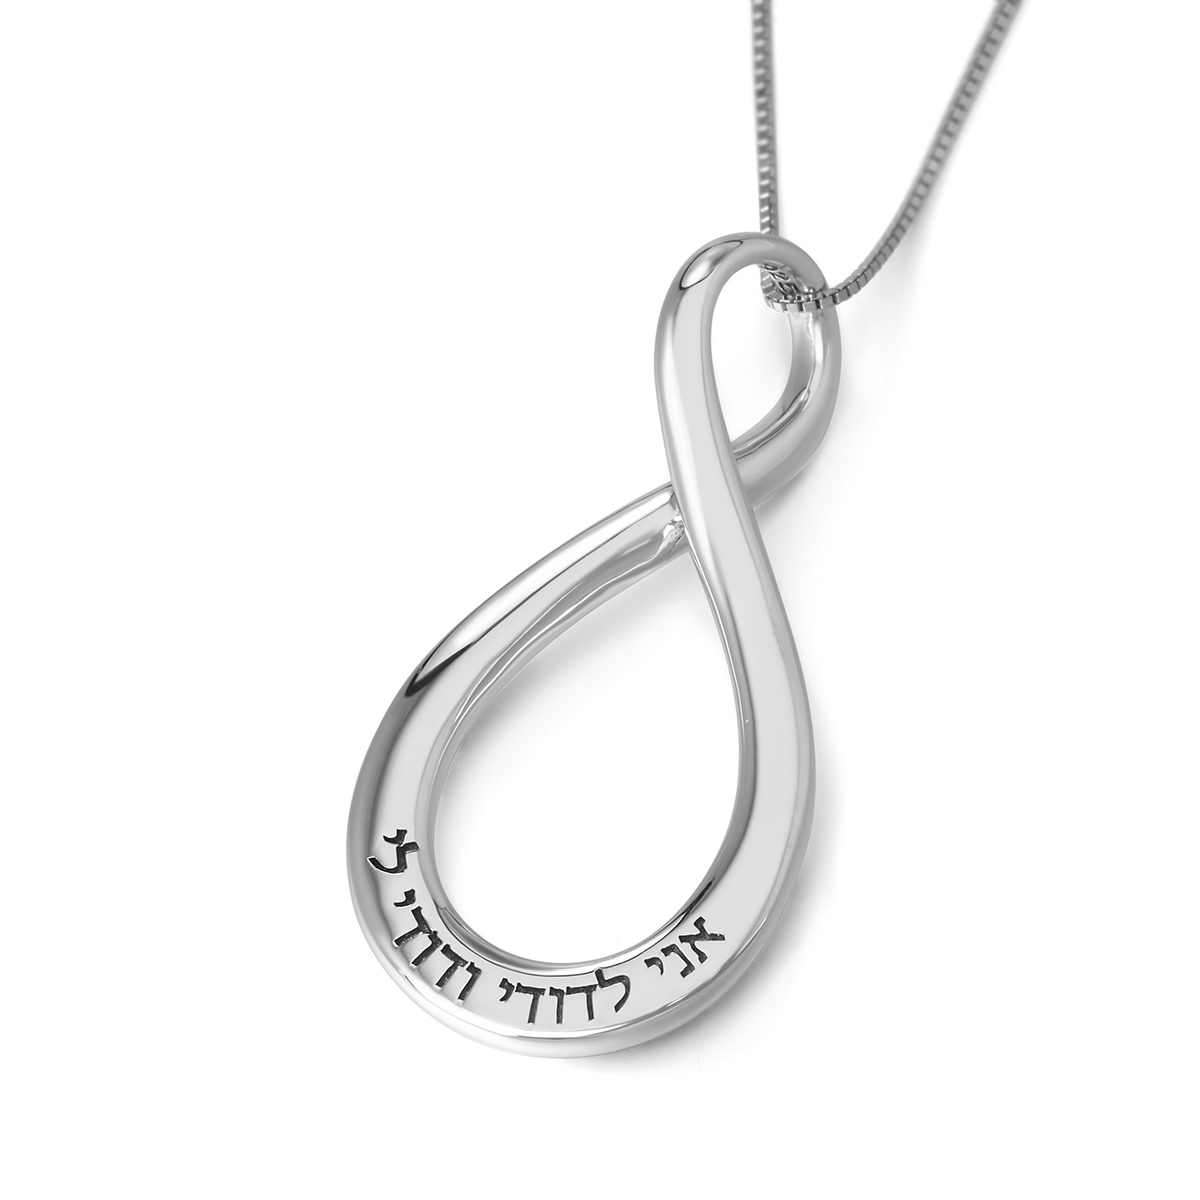 Ani L'Dodi Sterling Silver Large Infinity Necklace - English/Hebrew (Song of Songs 6:3) - 1